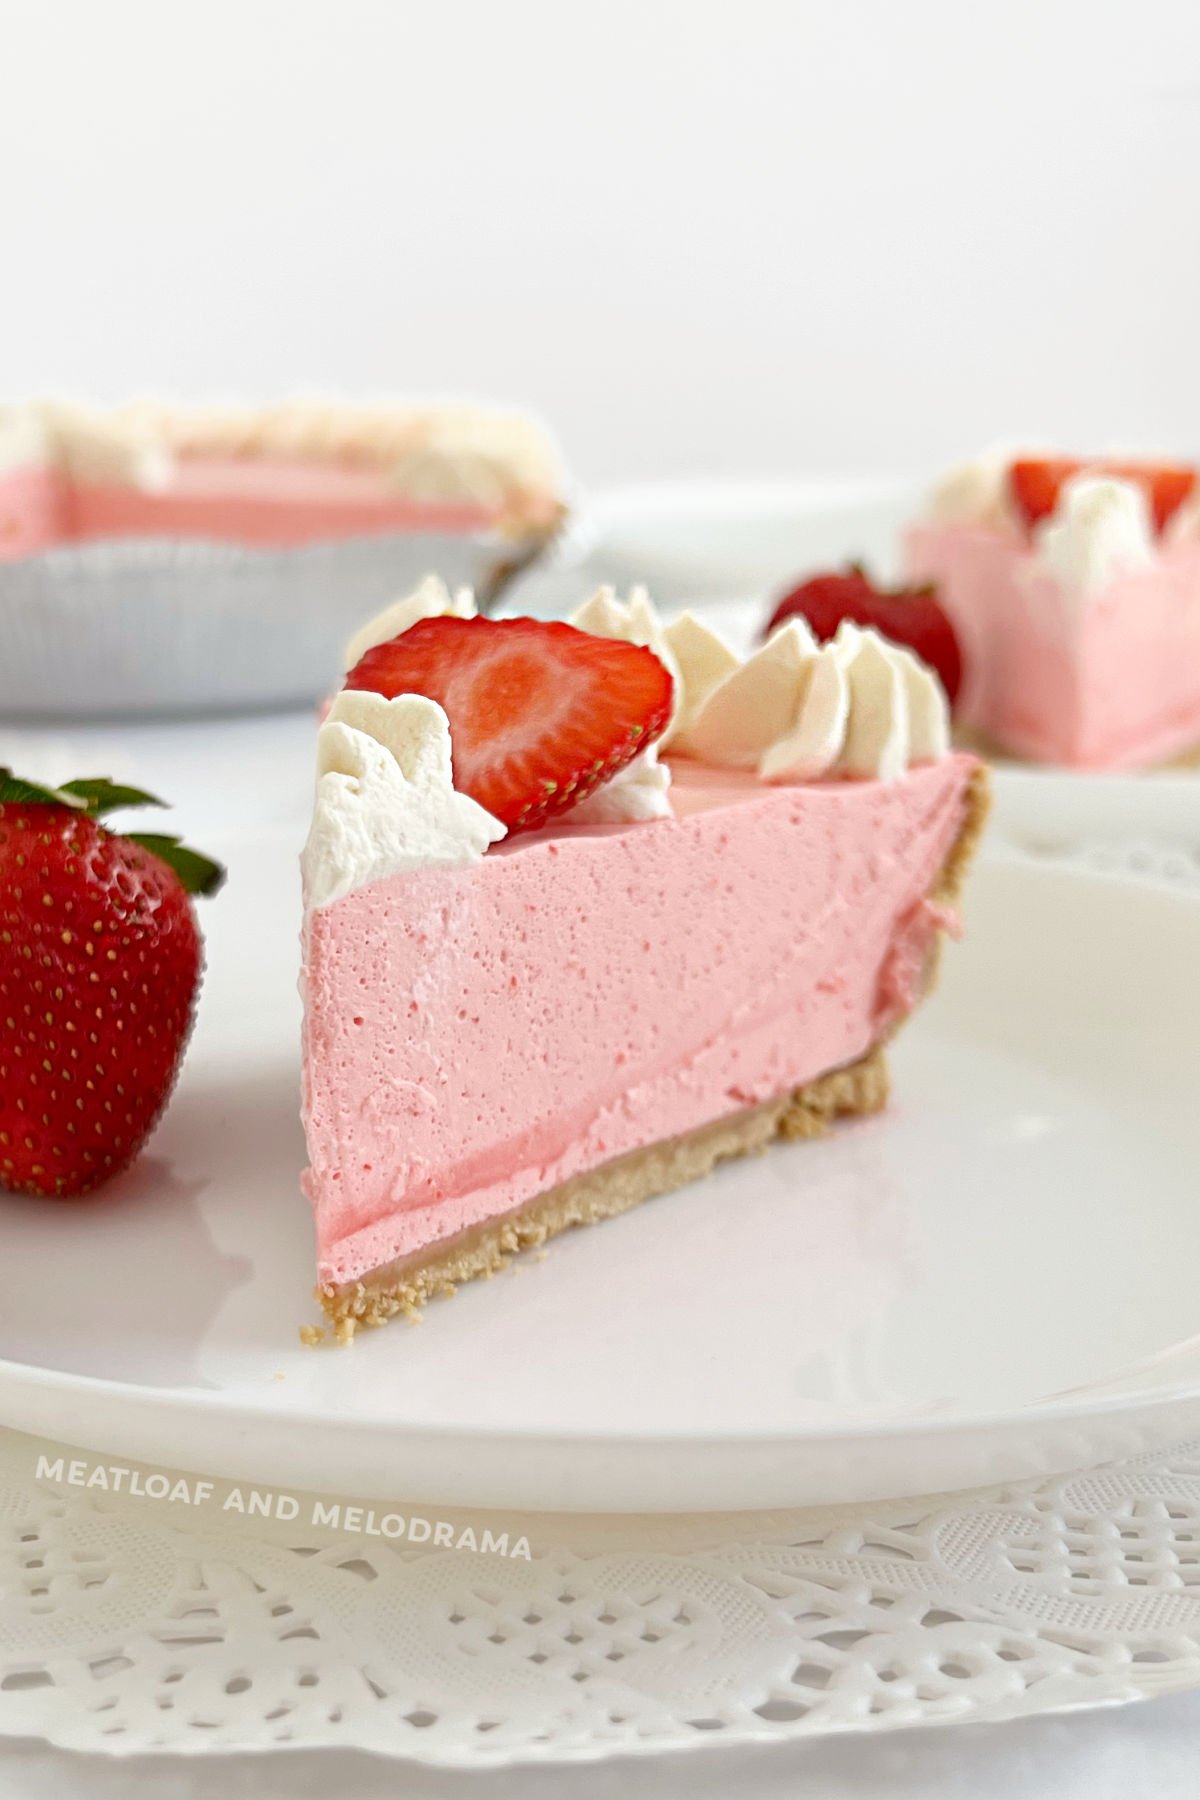 slice of no bake strawberry jello pie with cool whip, strawberries and whipped cream on plate